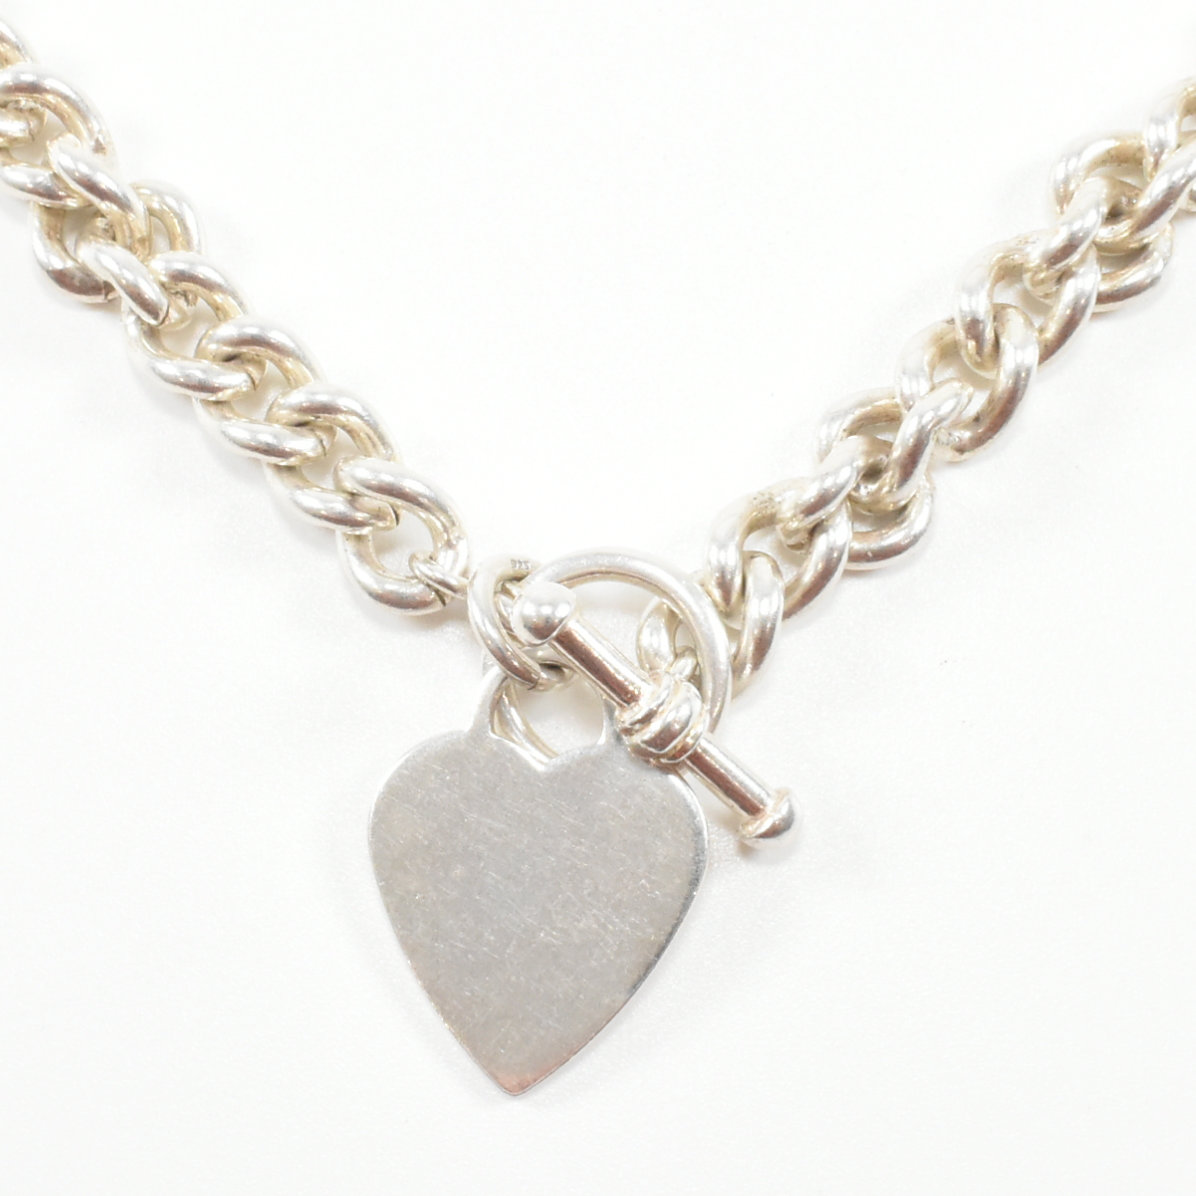 CONTEMPORARY 925 SILVER T BAR CURB LINK CHAIN & HEART PENDANT - Image 3 of 5